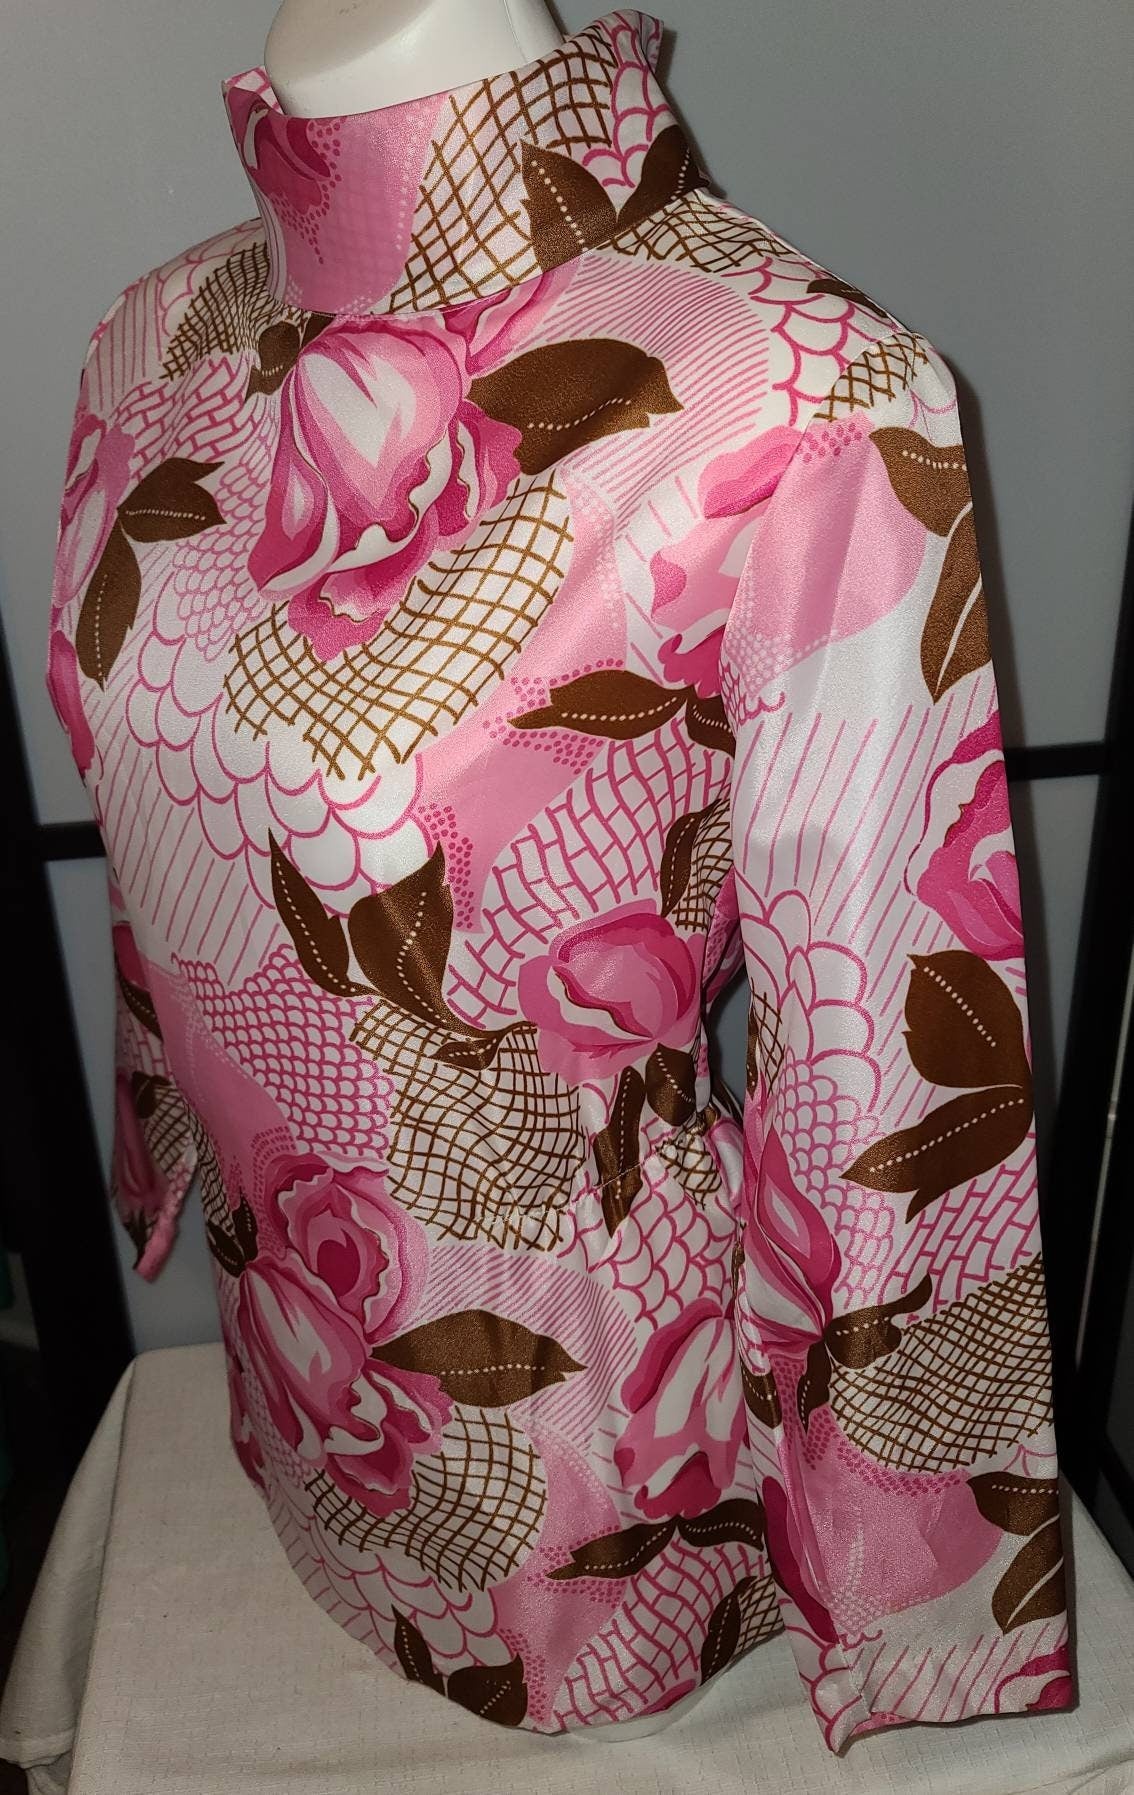 SALE Vintage 1960s Blouse Thin Polyester Brown Pink Abstract Rose Print Zip Back High Collar Tunic Top Boho M